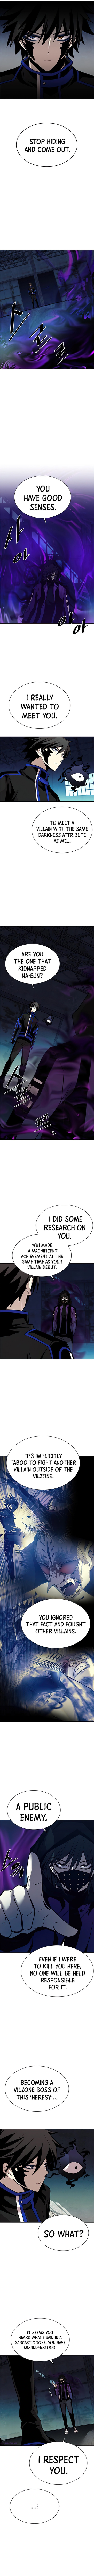 Villain to Kill - Chapter 48 Page 4